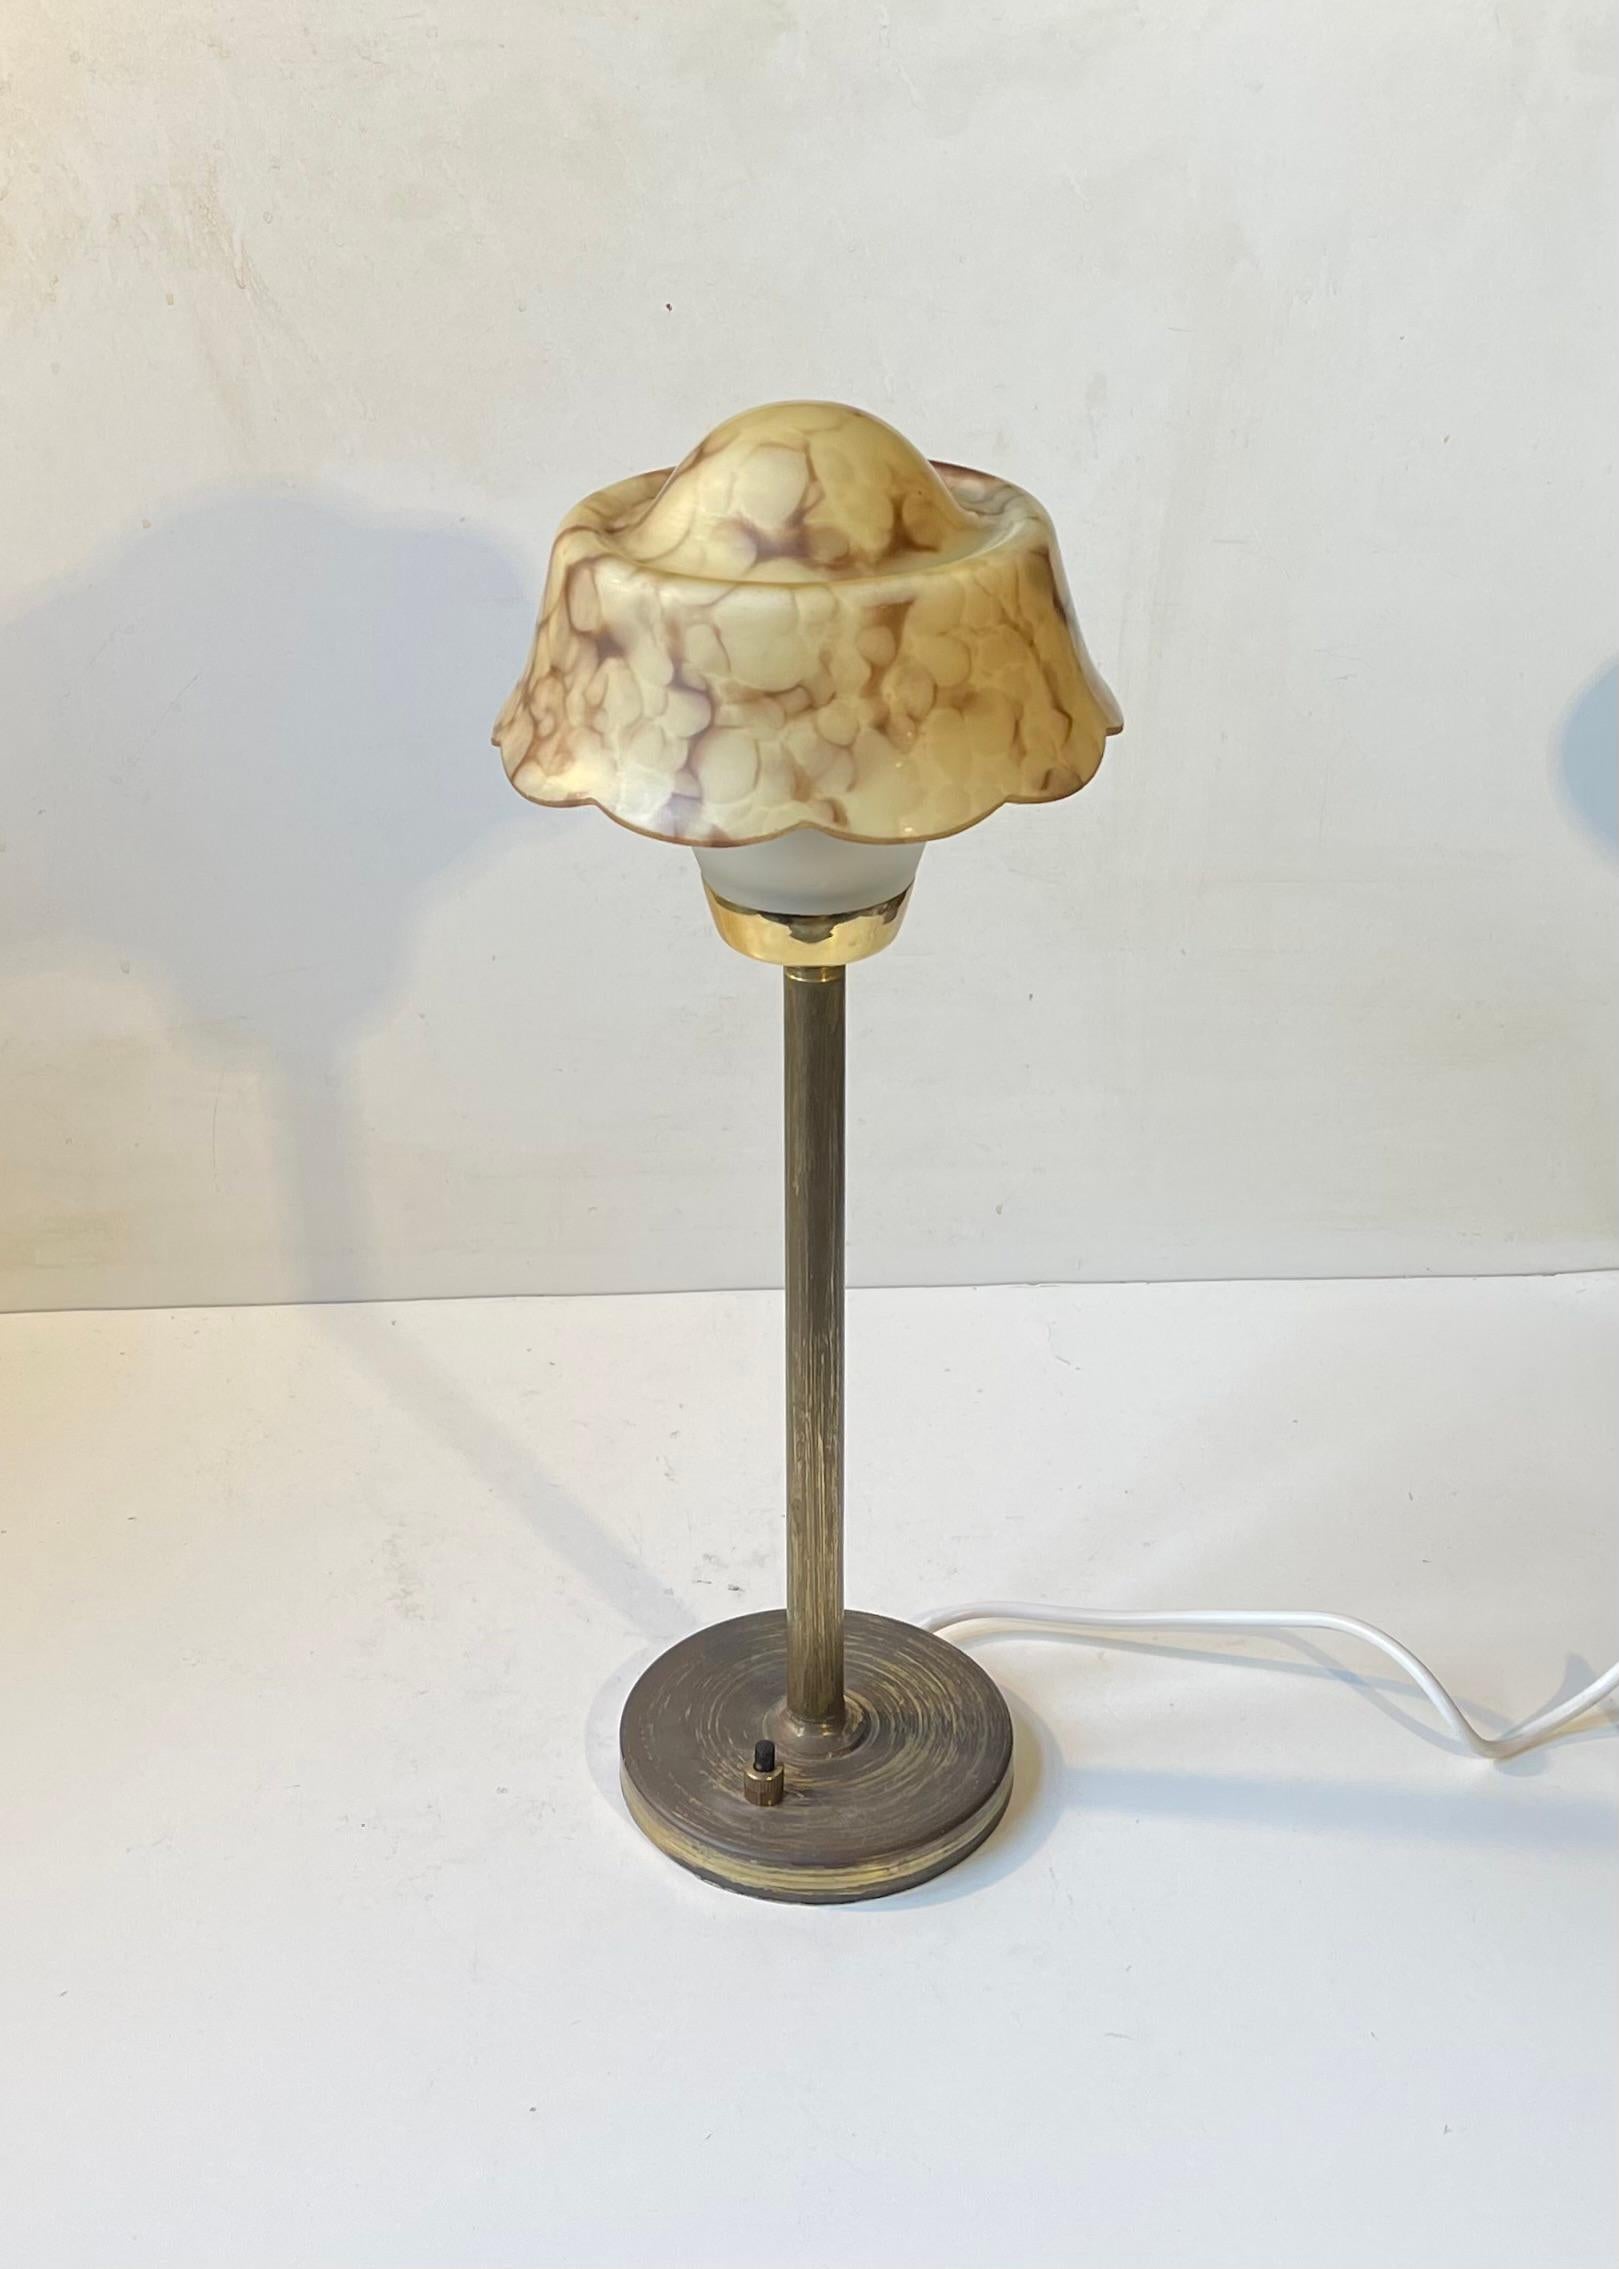 Art Deco styled desk lamp made by Fog and Mørup in Denmark during the 1940s. It features a patinated brass base and rod. The iconic marbled opaline glass top shade resembles a fried egg in shape - hence its unofficial common name: The Fried Egg.